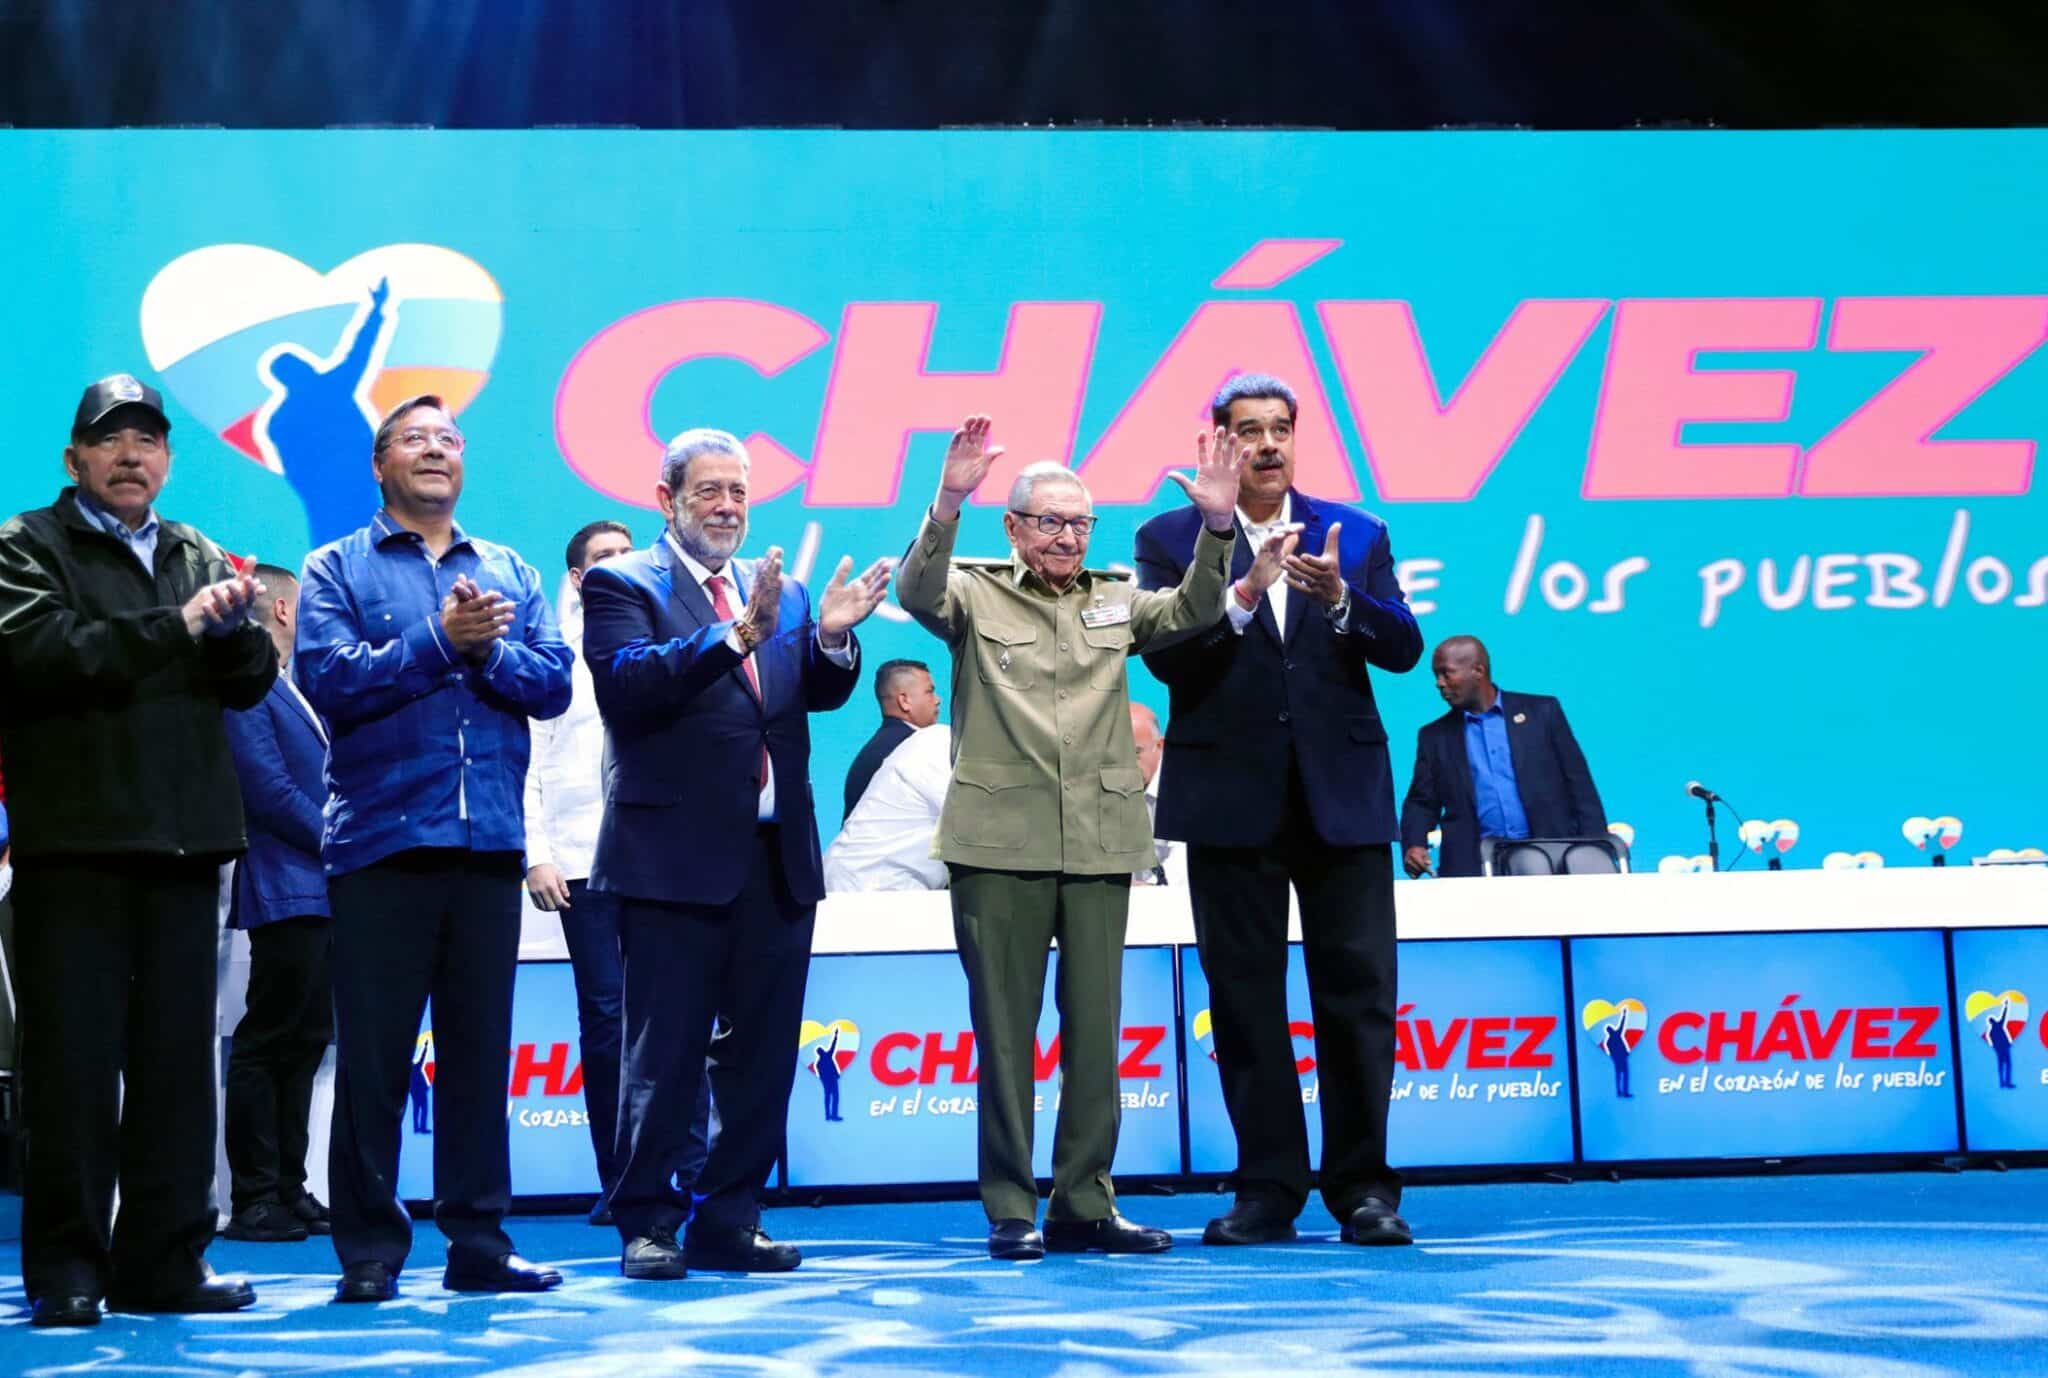 From left to right: President Daniel Ortega from Nicaragua, President Luis Arce from Bolivia, President Ralph Gonsalves from St. Vincent and the Grenadines, Cuban leader Raúl Castro and Venezuelan President Nicolás Maduro, standing and applauding during the closing ceremony of the congress organized in commemoration of the 10th anniversary of the passing of President Hugo Chávez, Sunday, March 5, 2023. Photo: Presidential Press.